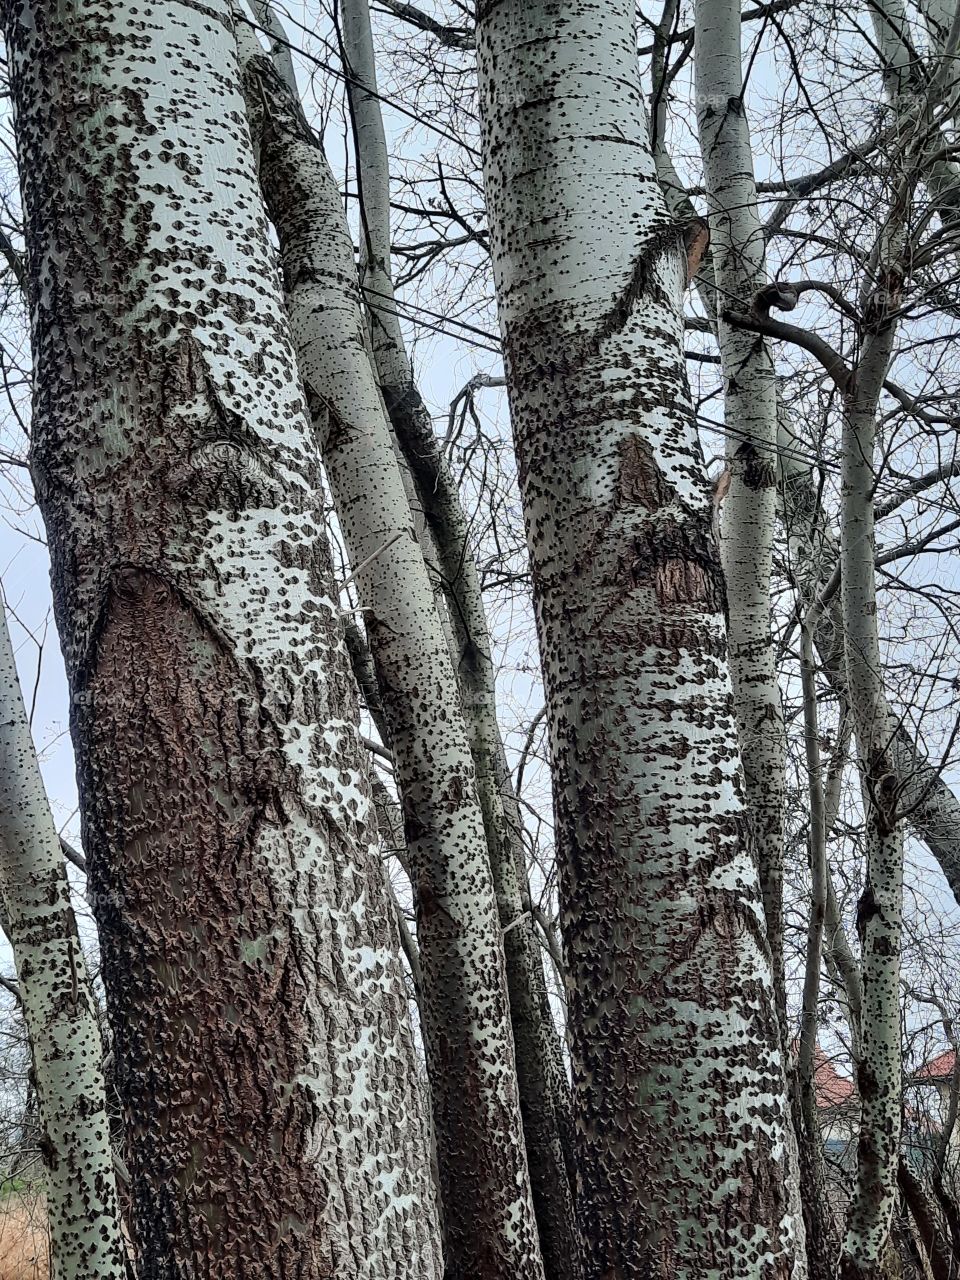 trees around us - trunks and bark of the aspen trees group